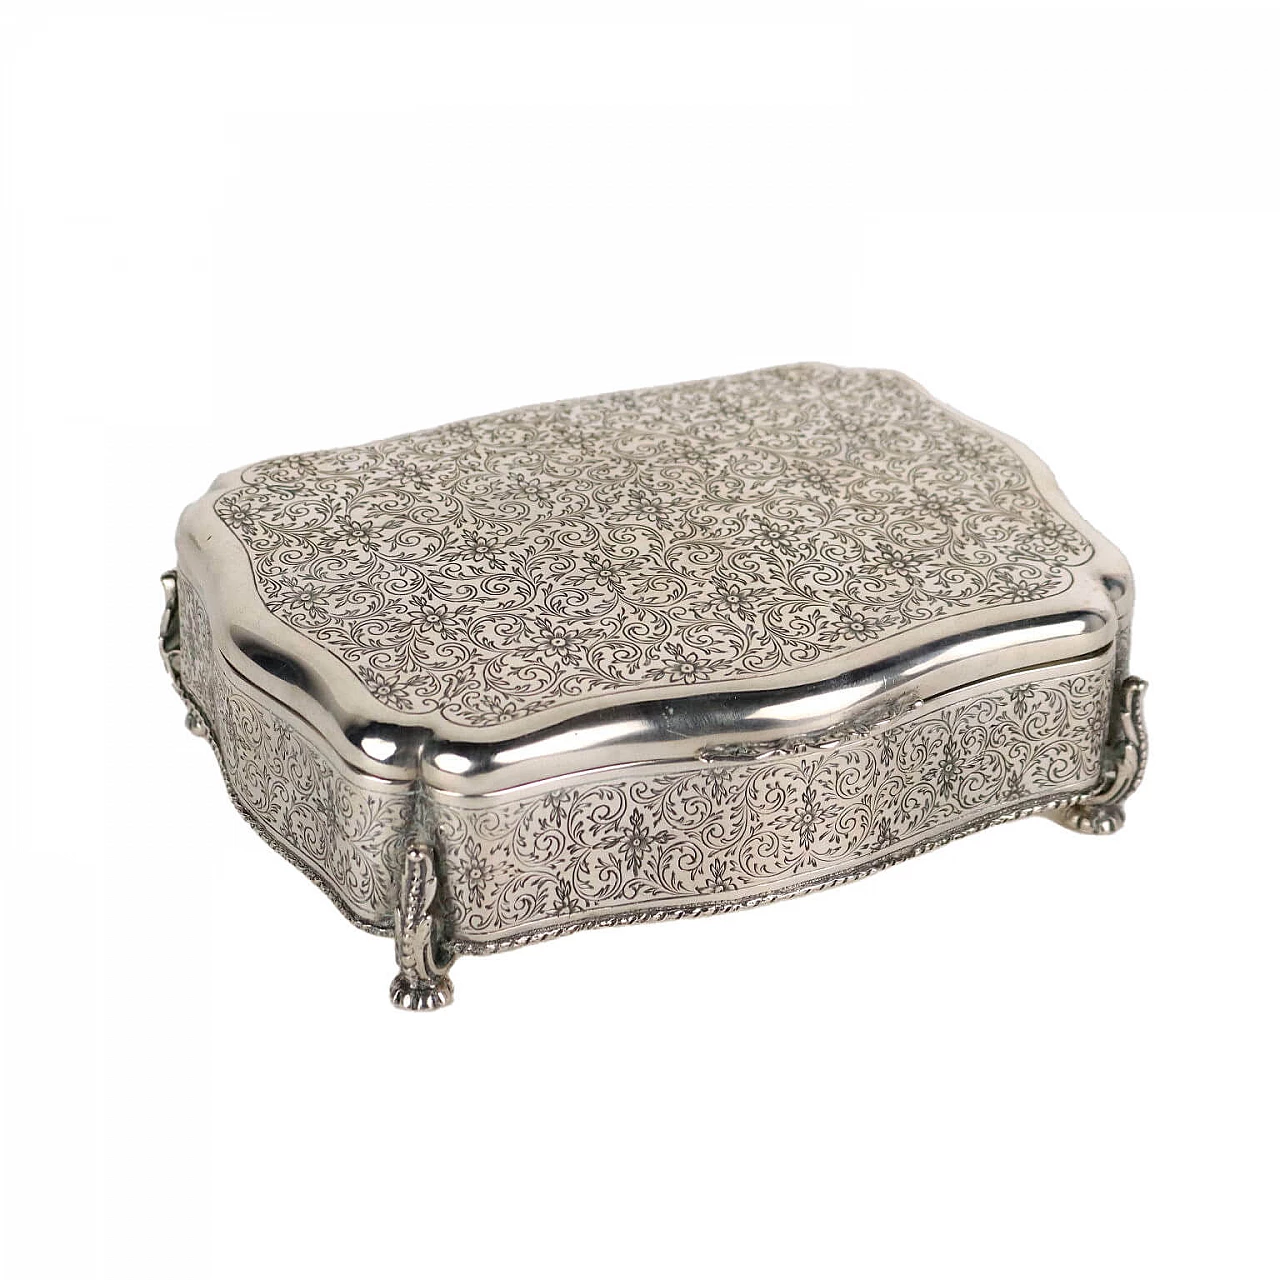 925 silver casket with engraved plant motif decorations, early 20th century 1